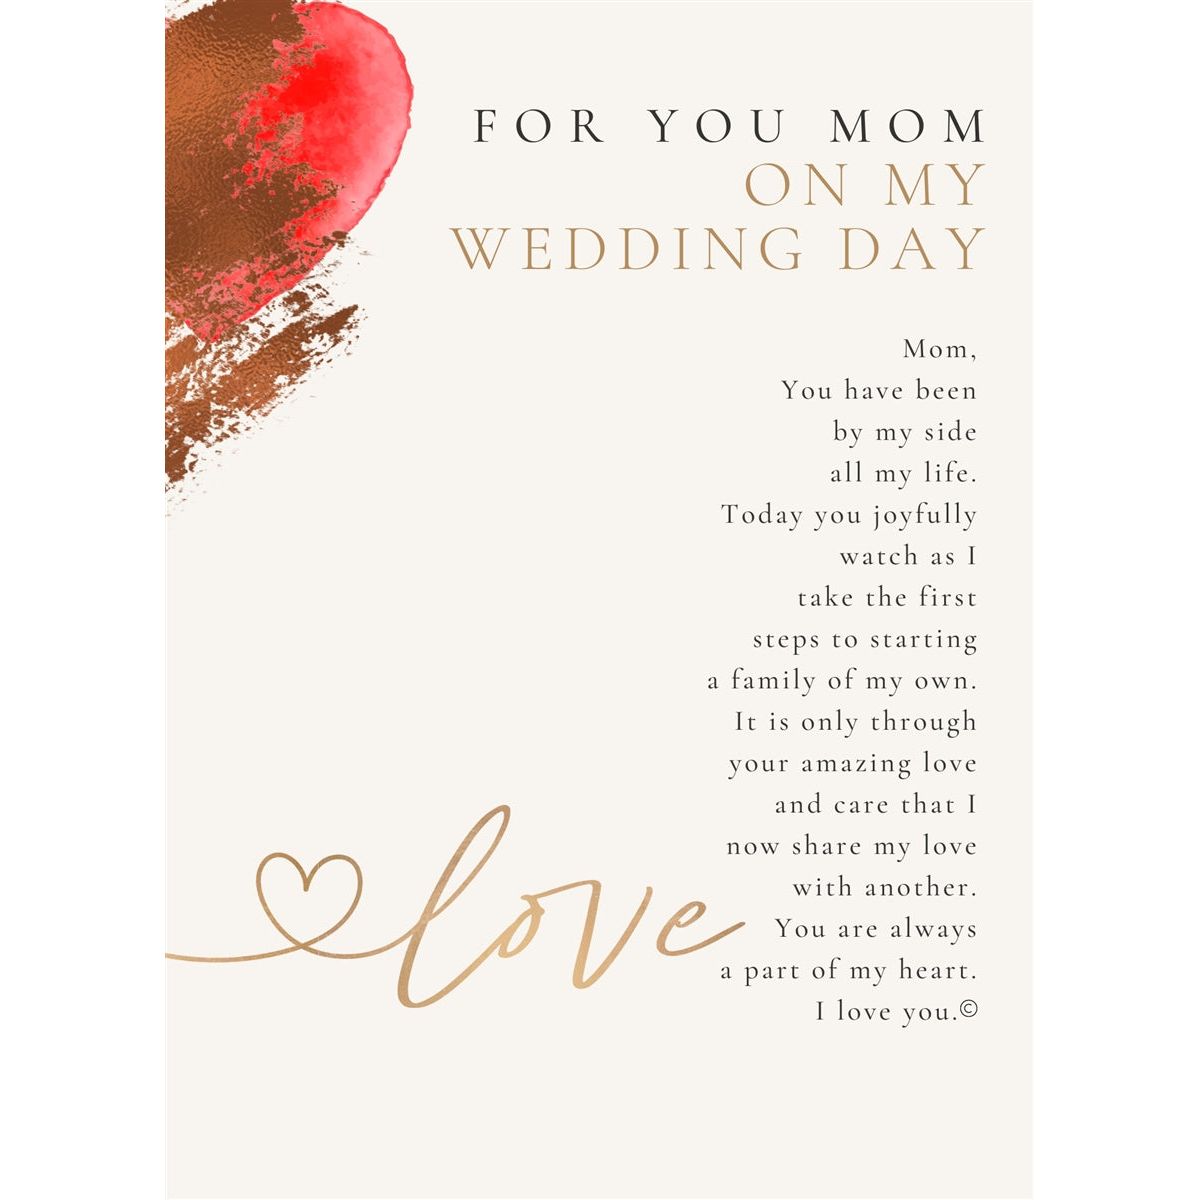 &quot;For You Mom On My Wedding Day&quot; artwork and poem.